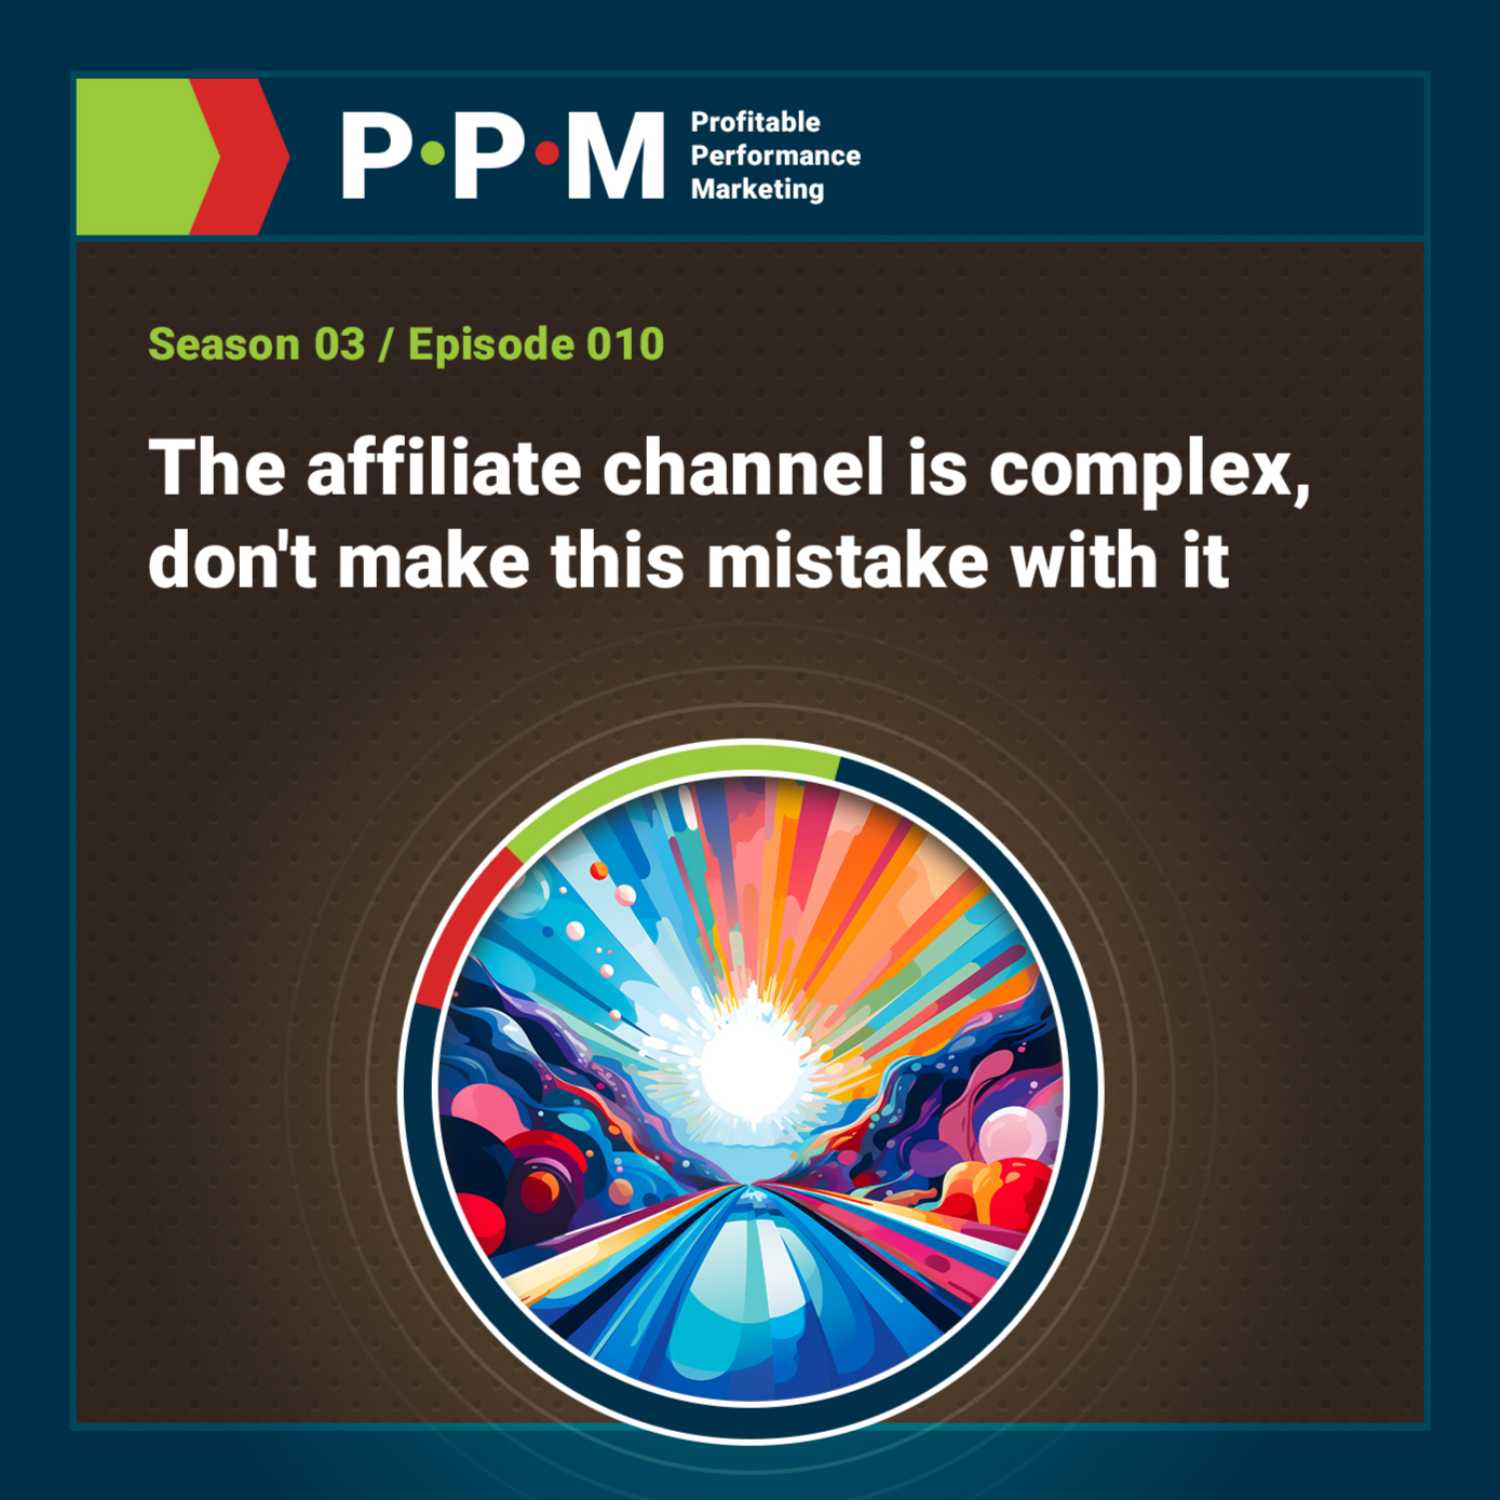 The affiliate channel is complex, don't make this mistake with it